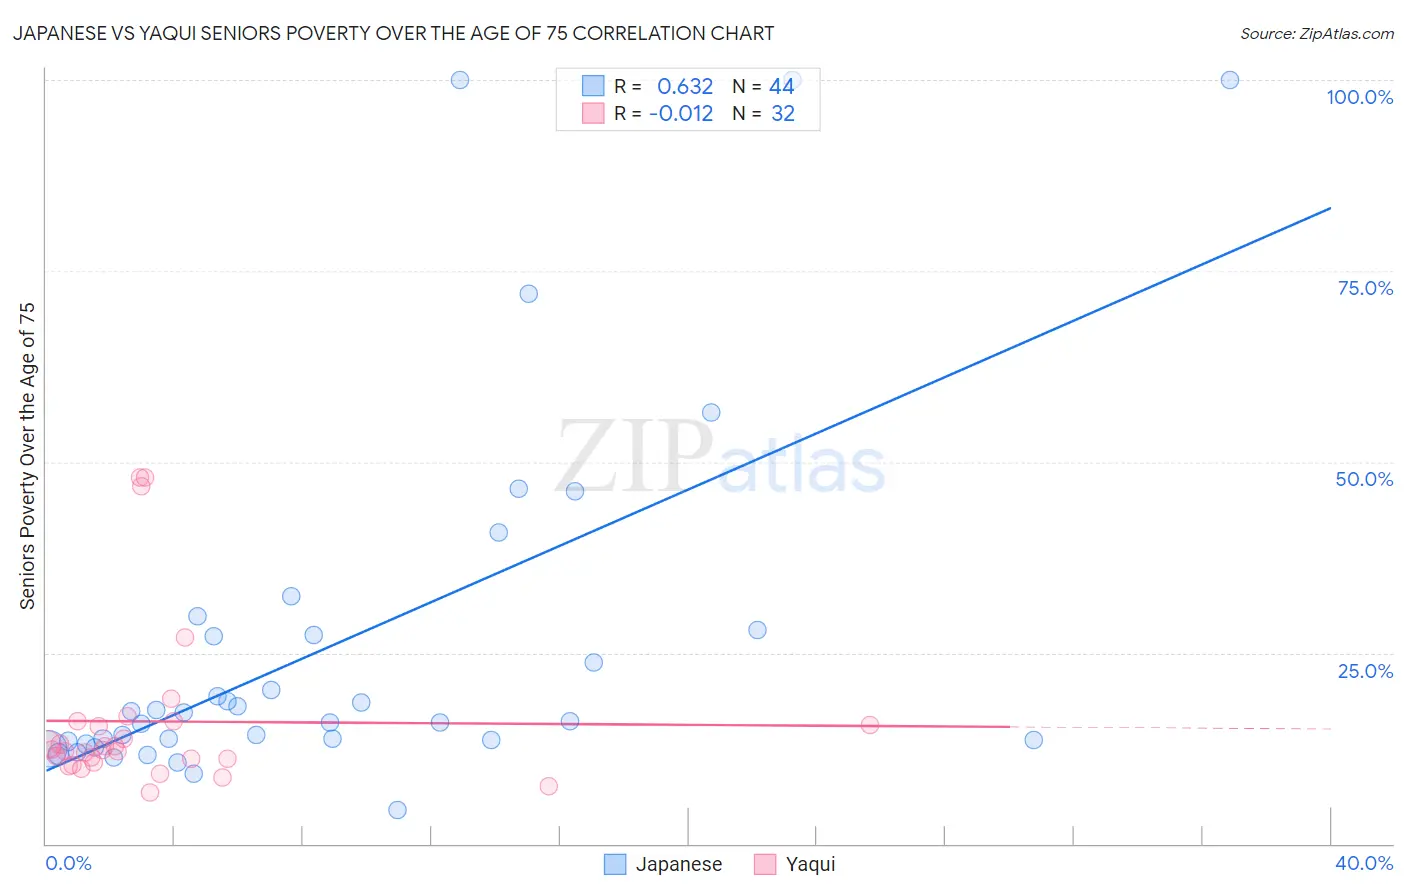 Japanese vs Yaqui Seniors Poverty Over the Age of 75